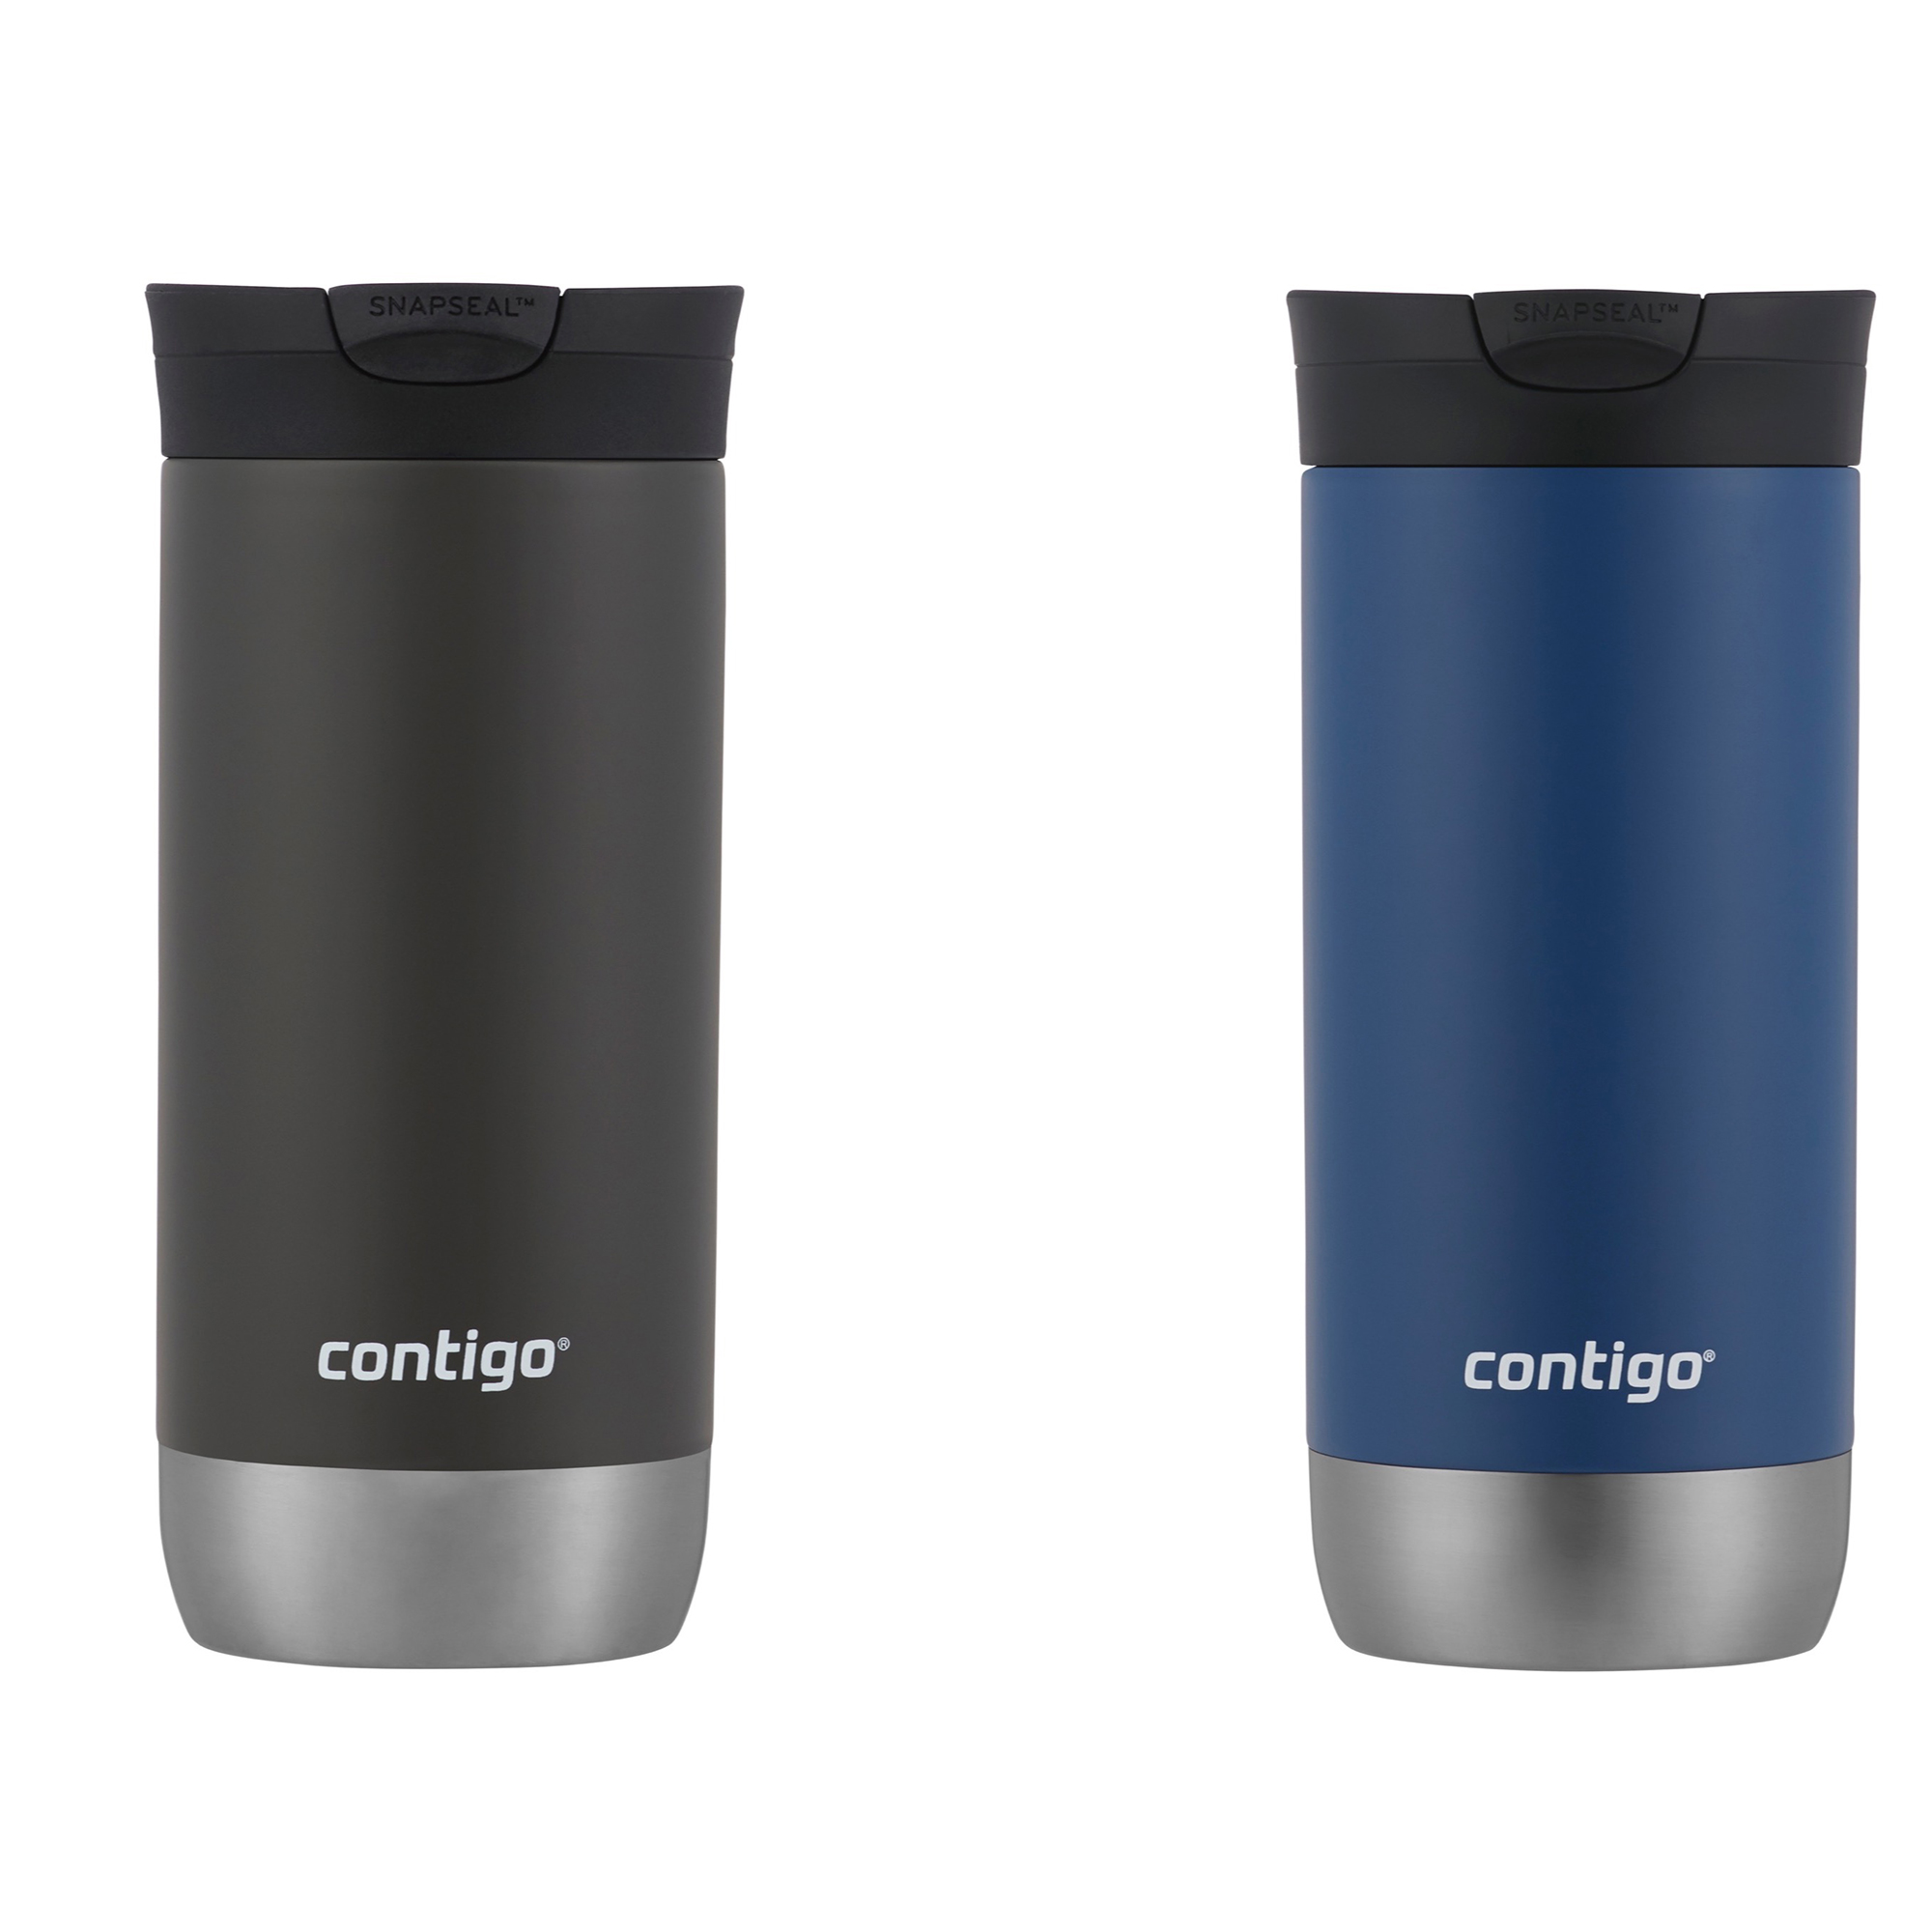 Contigo Byron 2.0 Stainless Steel Travel Mug with SNAPSEAL Lid and Grip Sake and Blue Corn, 16 fl oz., 2-Pack - image 1 of 11